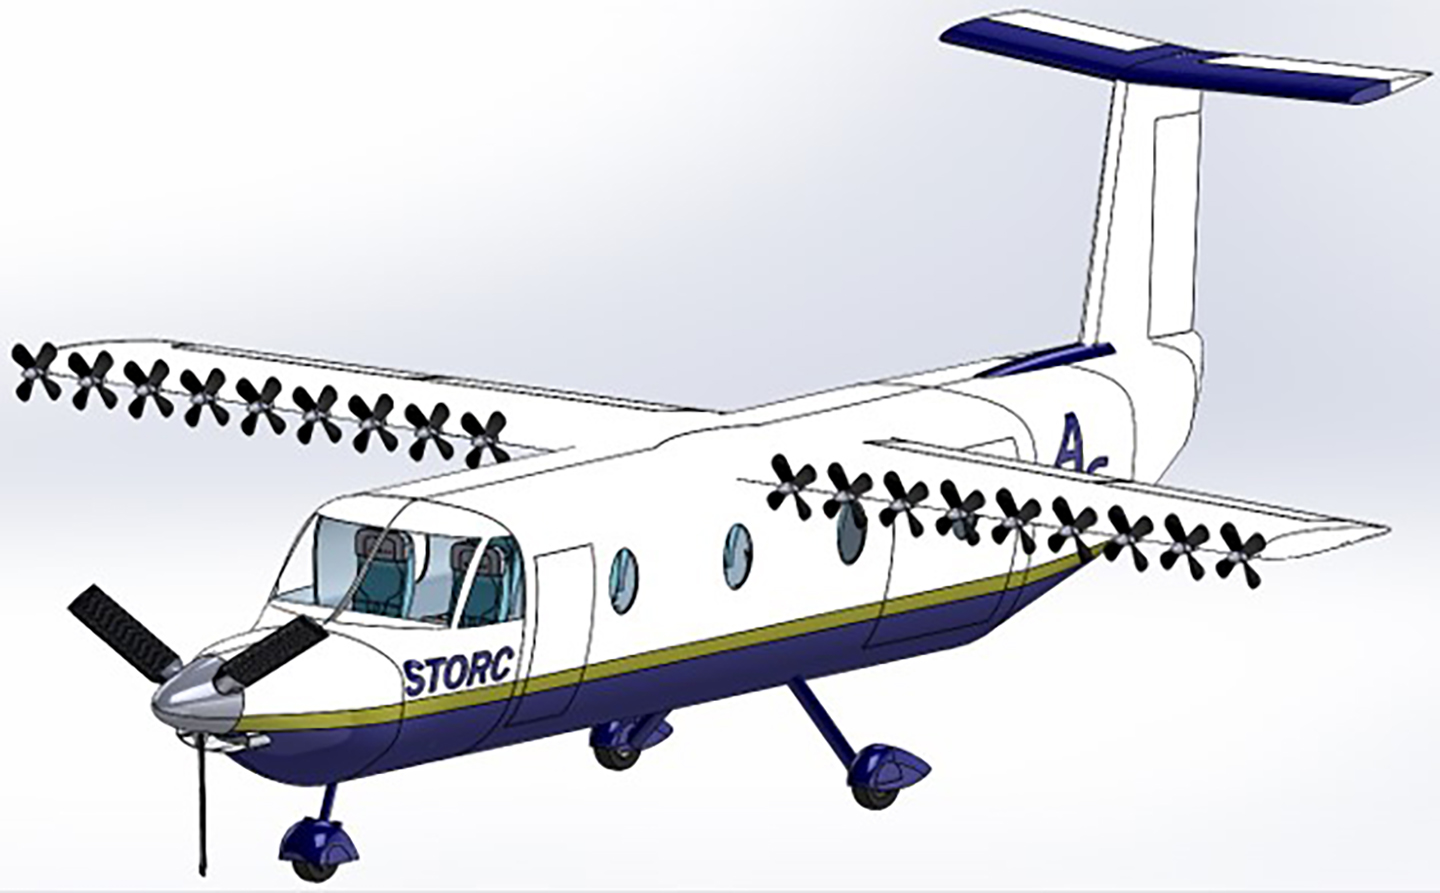 Artist rendering of the STORC aircraft.